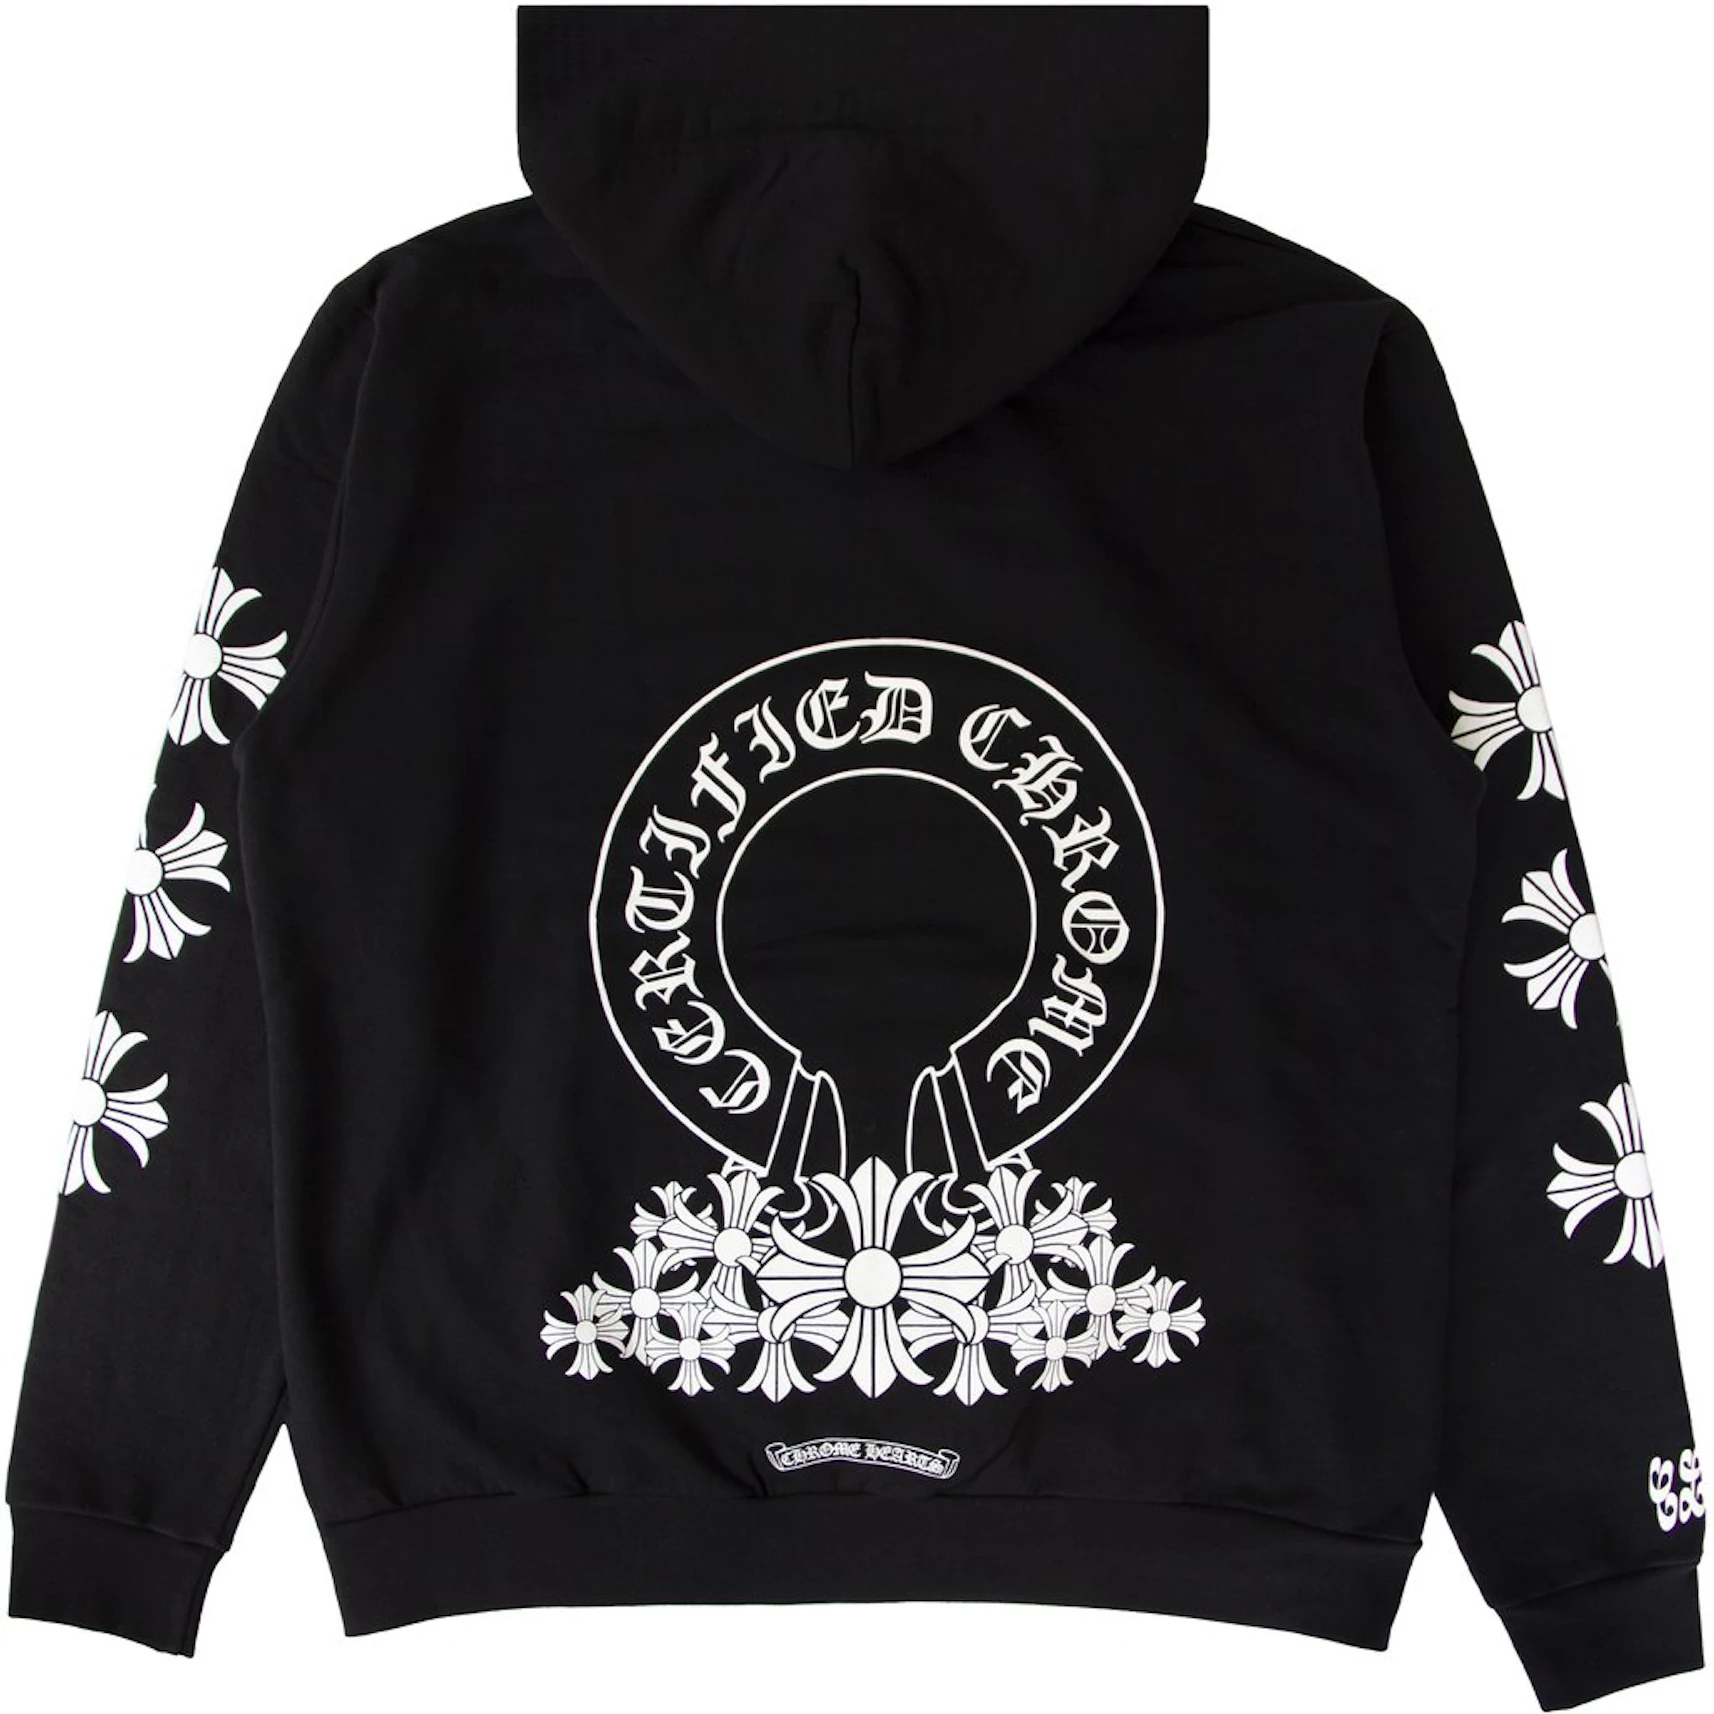 Chrome Hearts x Drake Certified Lover Boy Hoodie Black (Miami Exclusive) - US